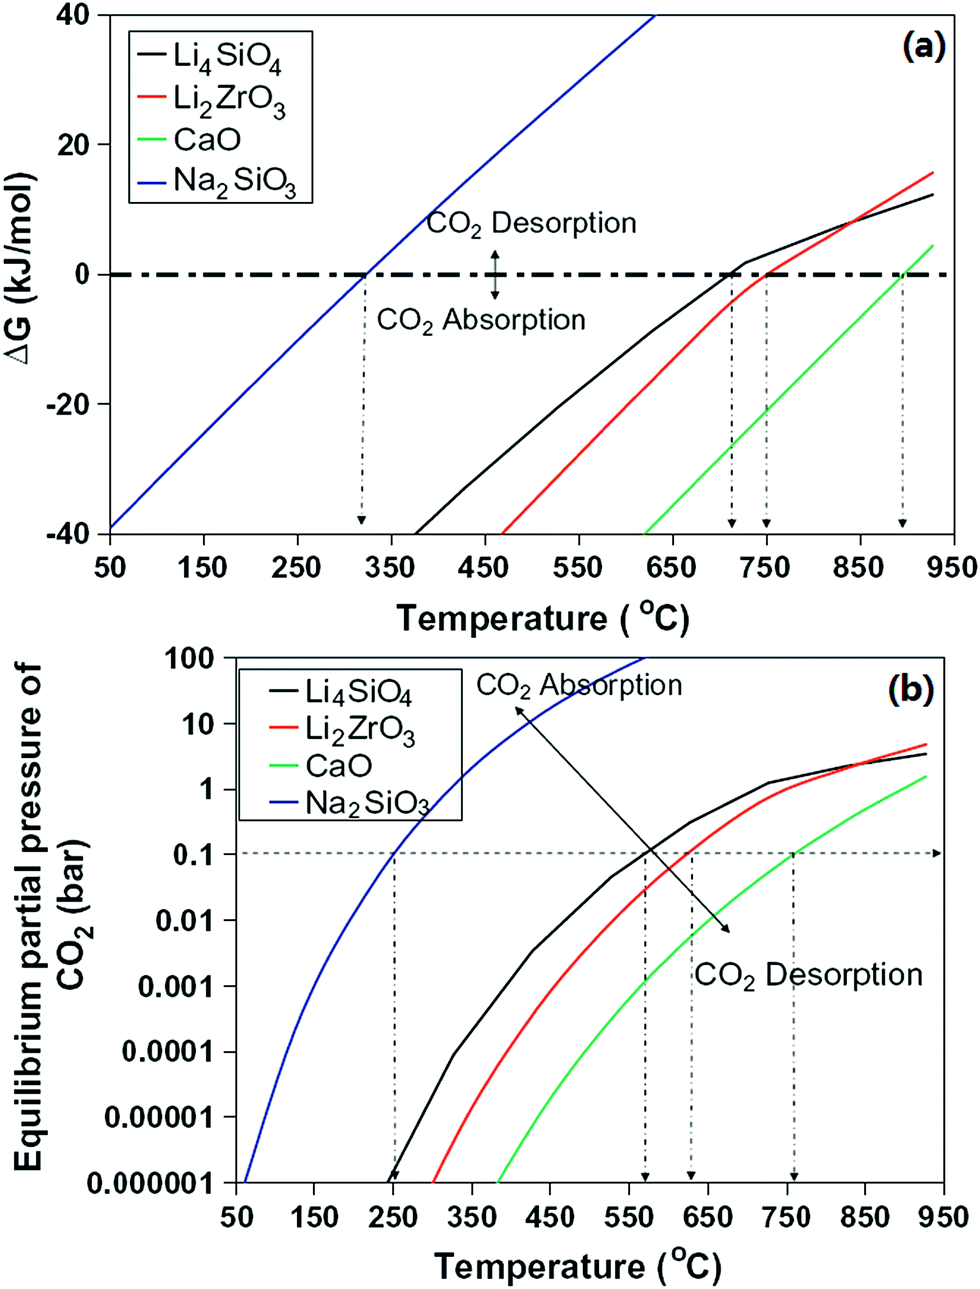 Recent Advances In Lithium Containing Ceramic Based Sorbents For High Temperature Co 2 Capture Journal Of Materials Chemistry A Rsc Publishing Doi 10 1039 C8ta032a